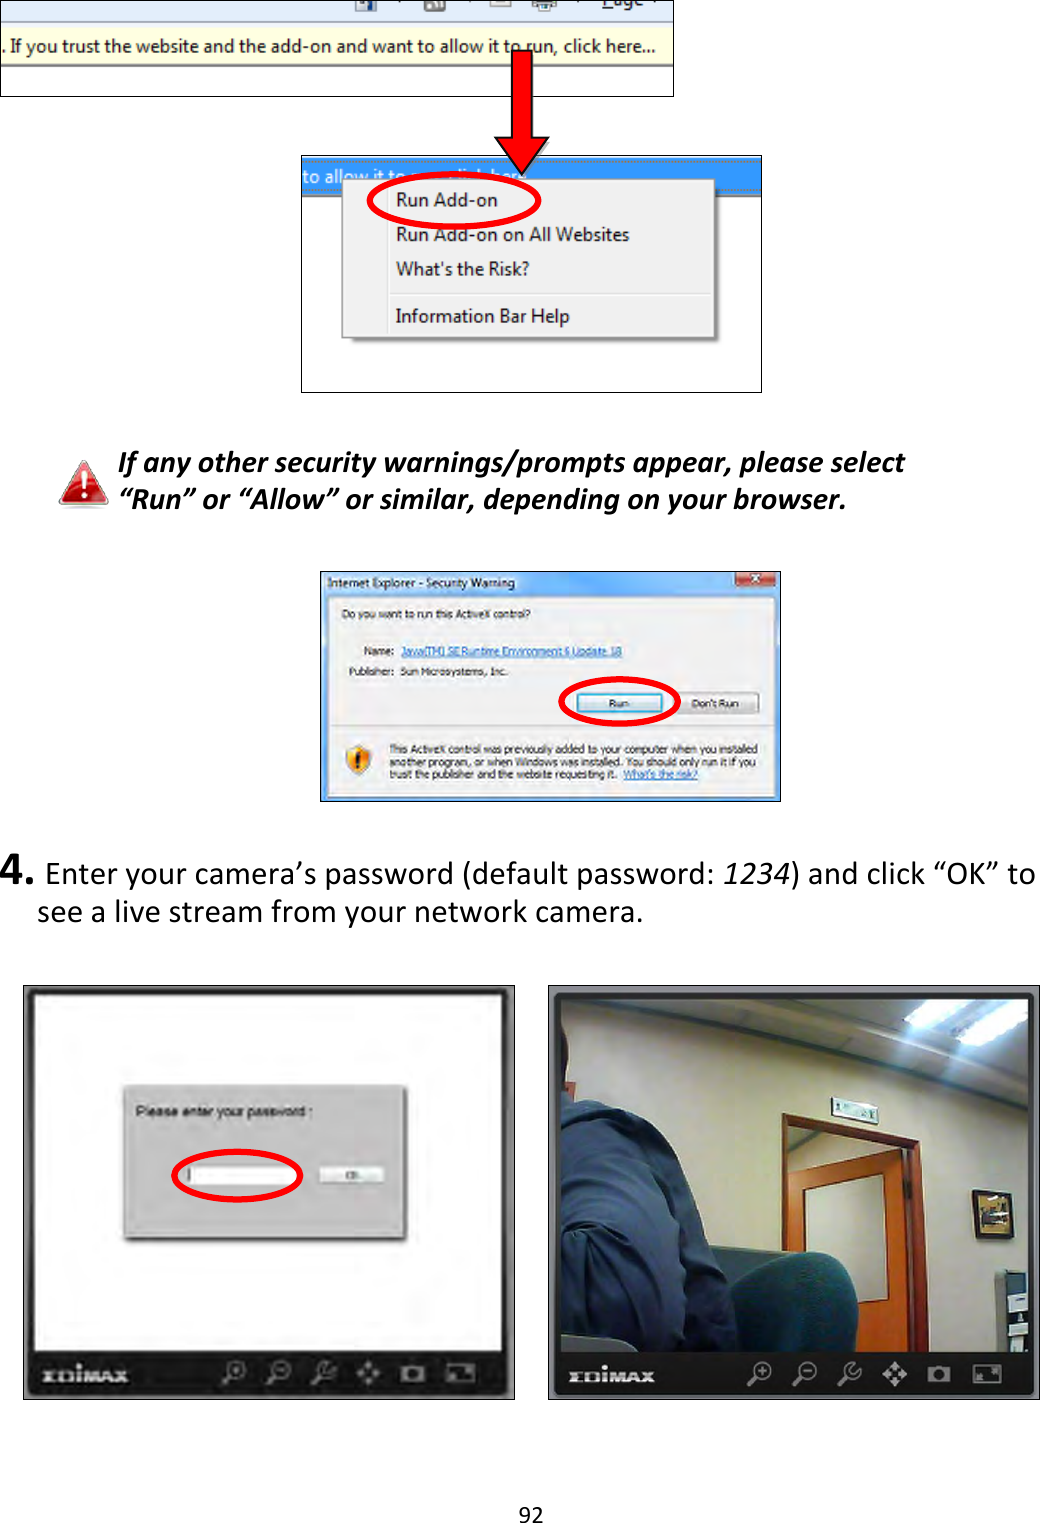 92       If any other security warnings/prompts appear, please select “Run” or “Allow” or similar, depending on your browser.    4.  Enter your camera’s password (default password: 1234) and click “OK” to see a live stream from your network camera.        